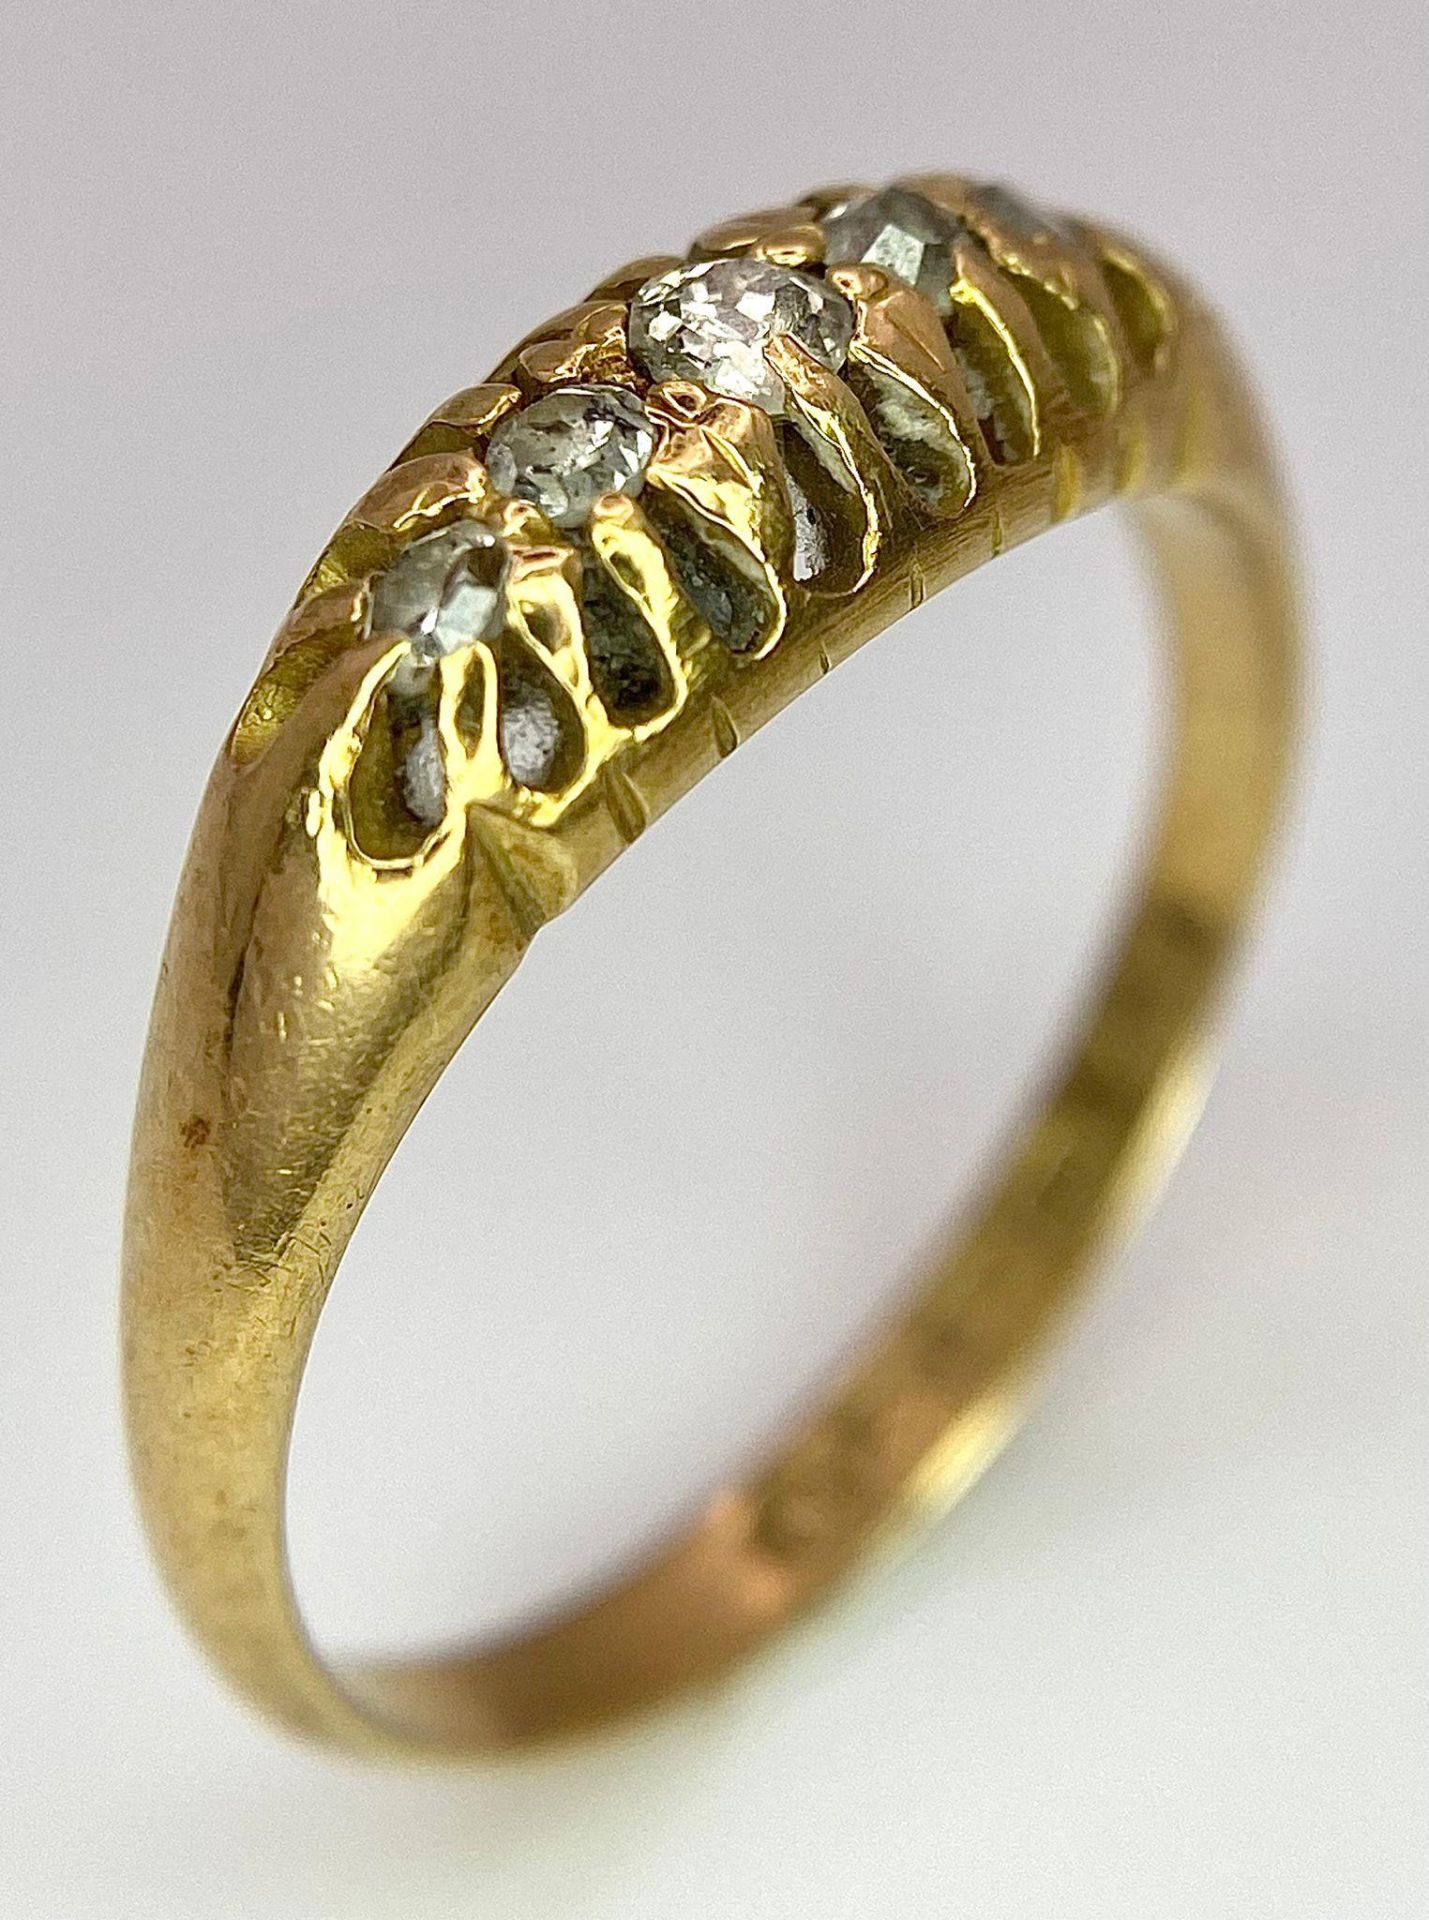 An 18 K yellow gold ring with a band of five diamonds, size: O, weight: 3.2 g. - Image 4 of 7